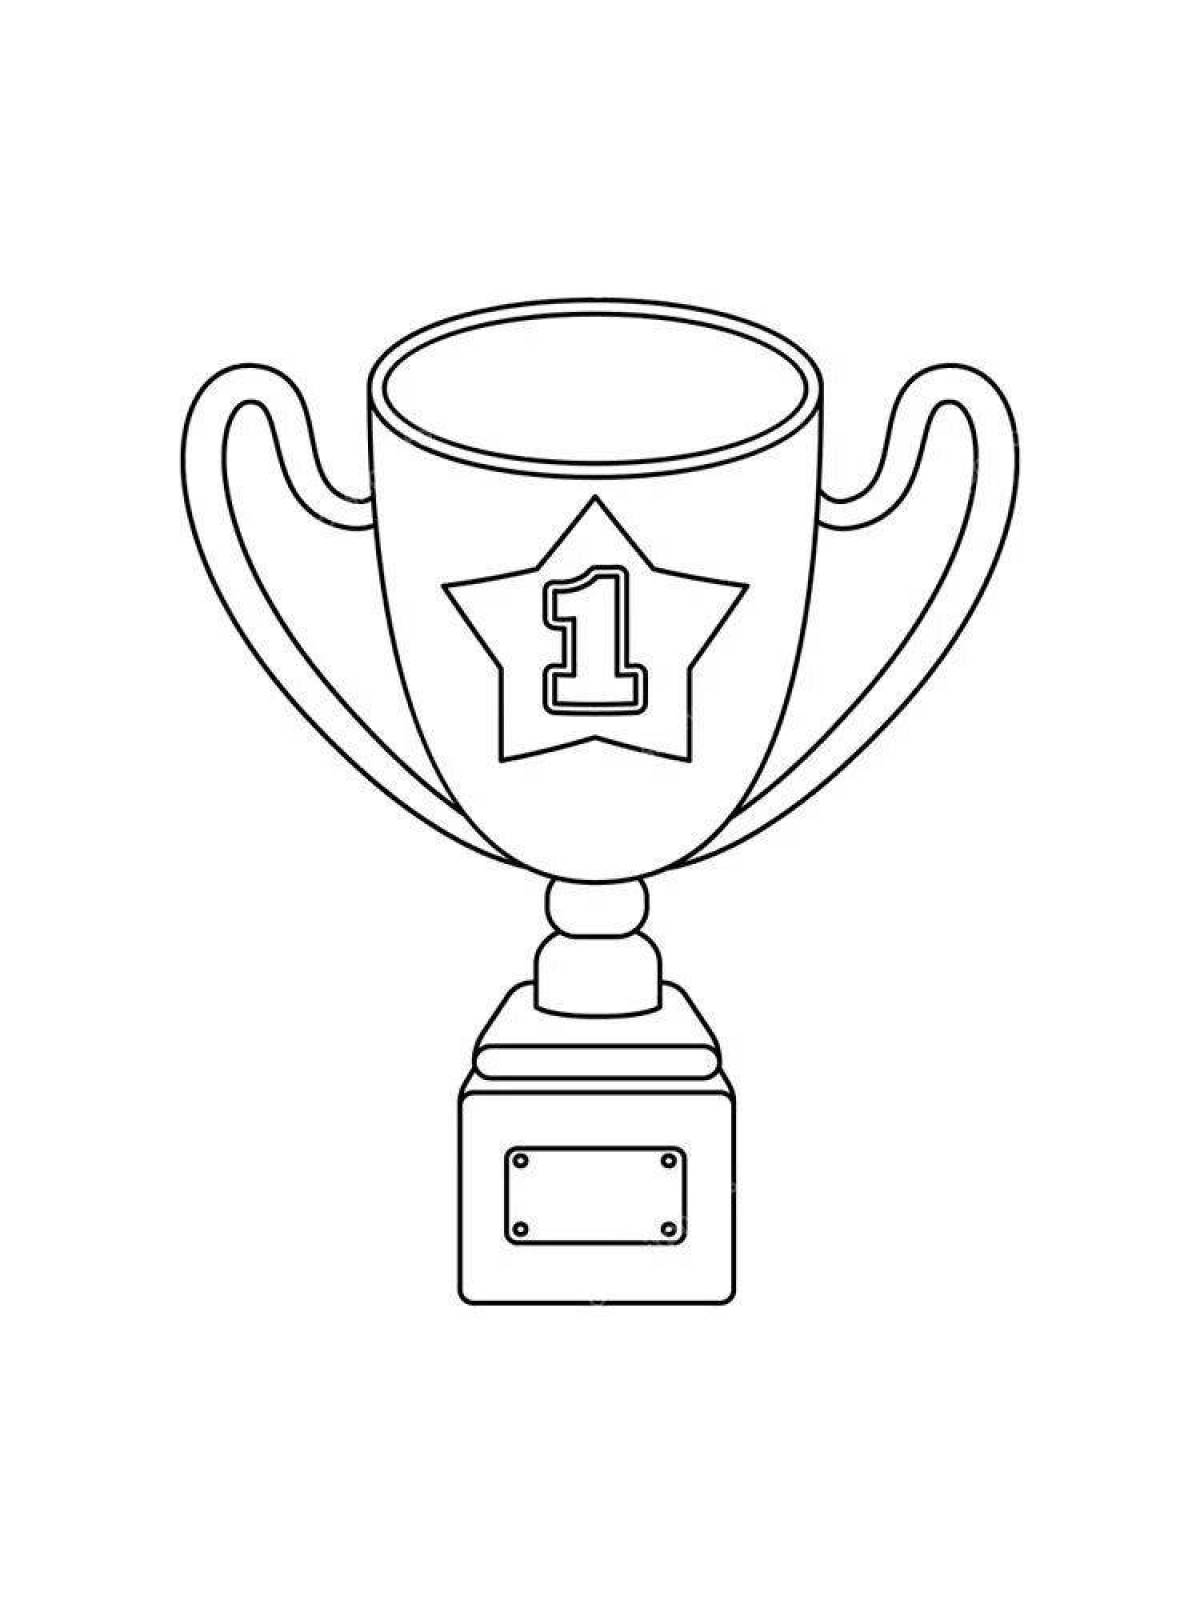 Colorful winner cup coloring page